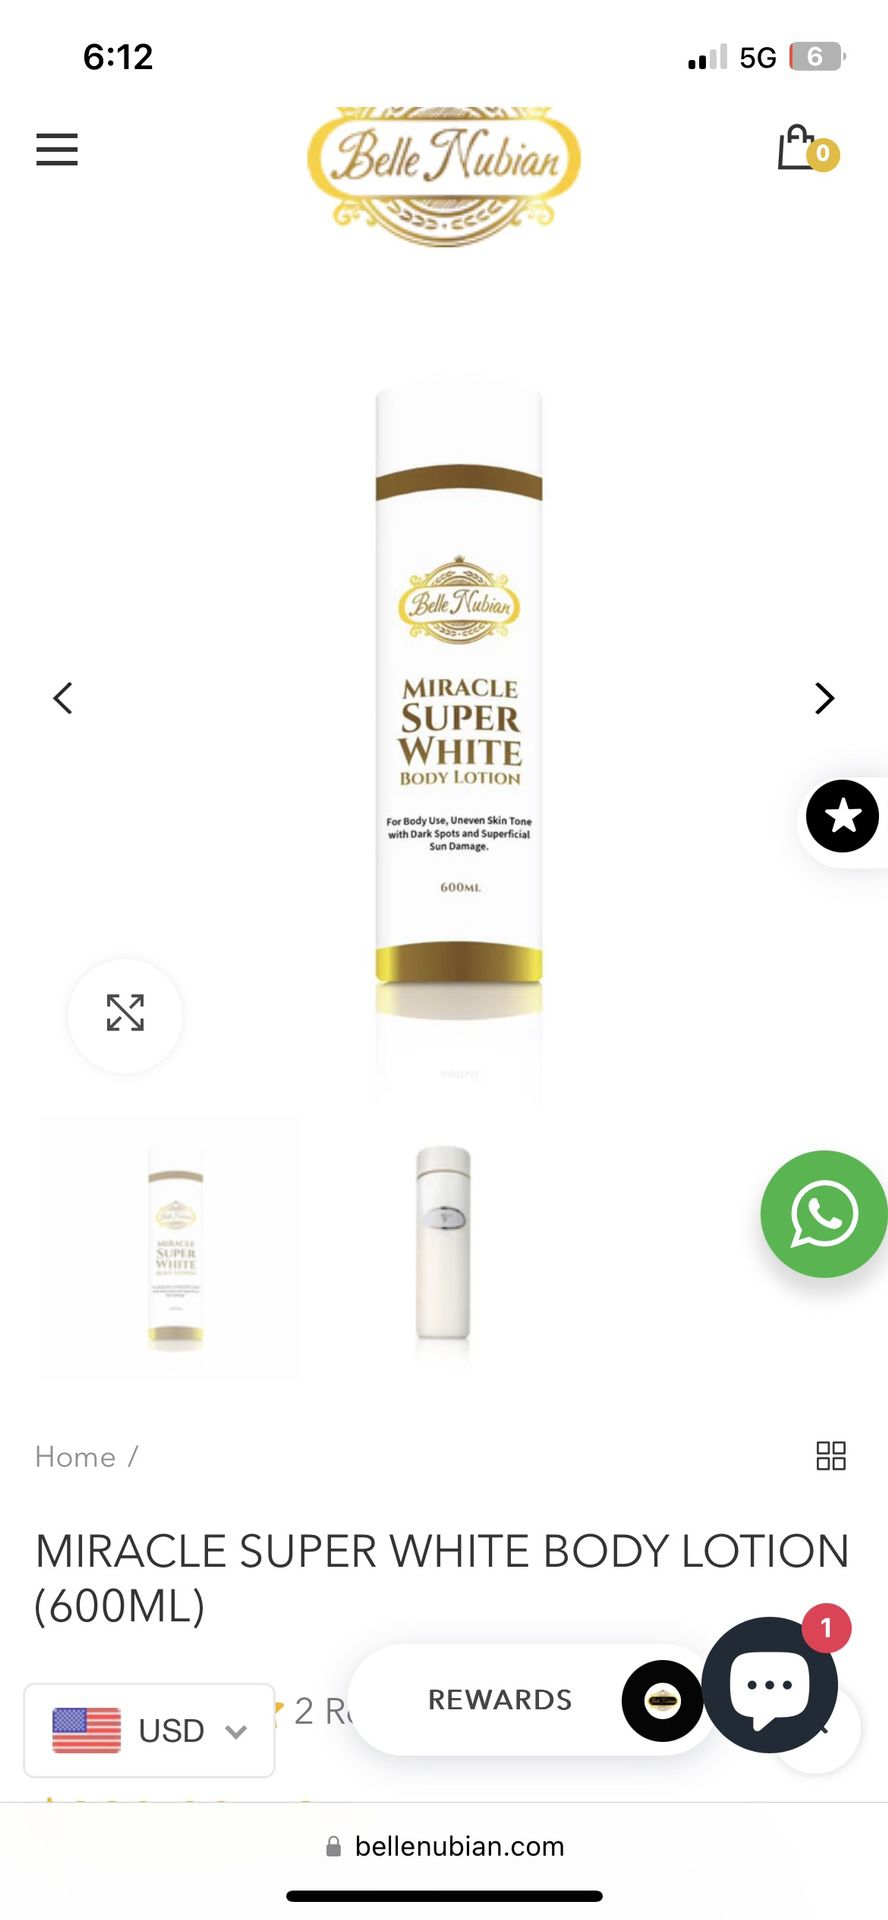 NEW Belle Nubian Miracle Super White Body Lotion Retails 300$